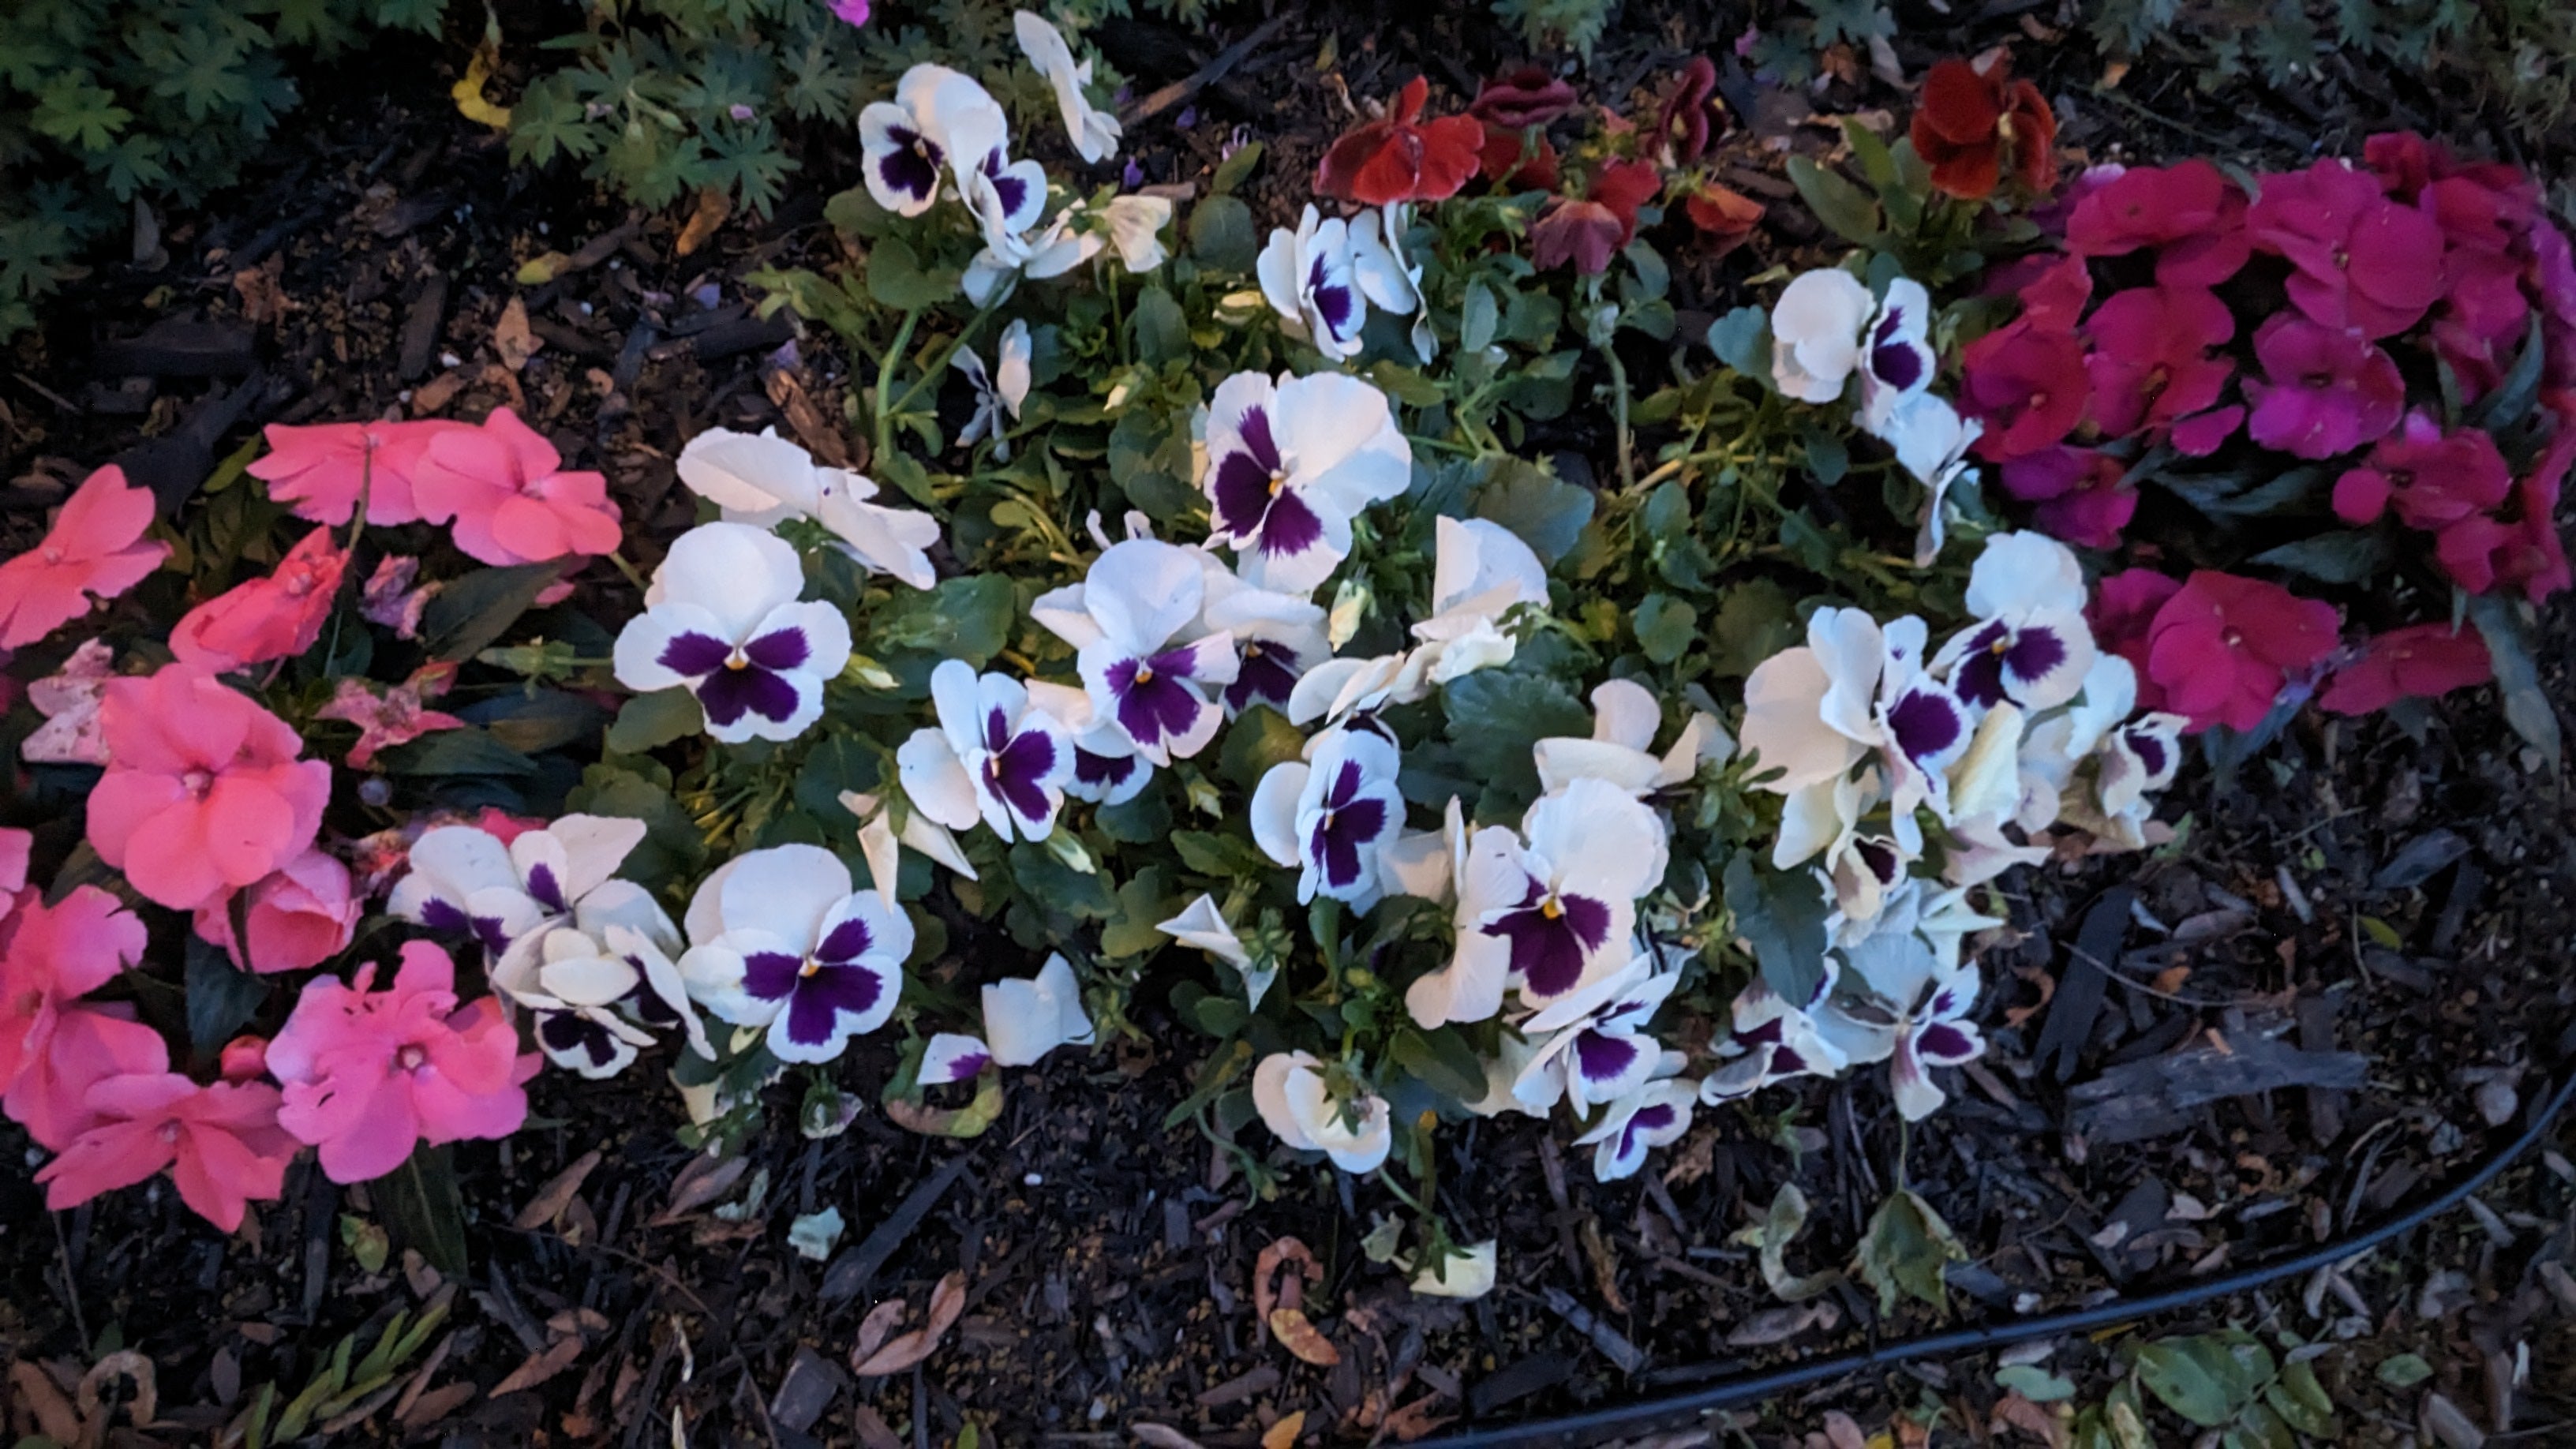 The Pixel Tablet can take advantage of Google's many AI-powered camera tricks, including Night Sight, which did an admirable job at capturing flowers after the sun had set. (Photo: Andrew Liszewski | Gizmodo)